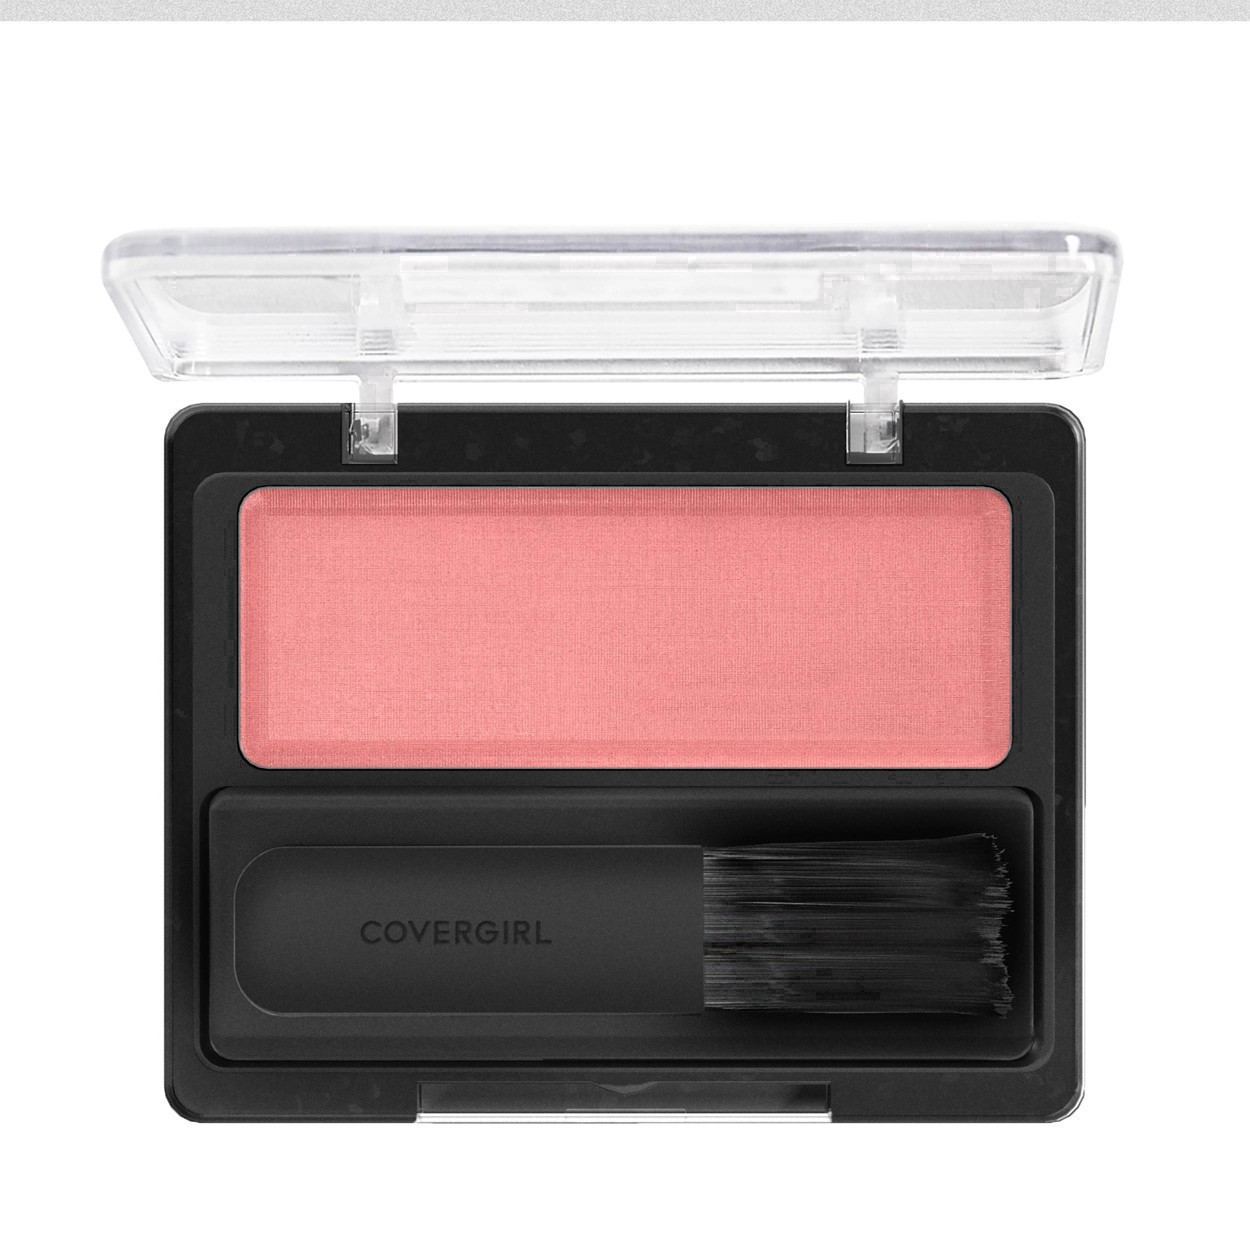 slide 10 of 42, COTY COVERGIRL COVERGIRL Classic Color Blush Rose Silk, 1 ct